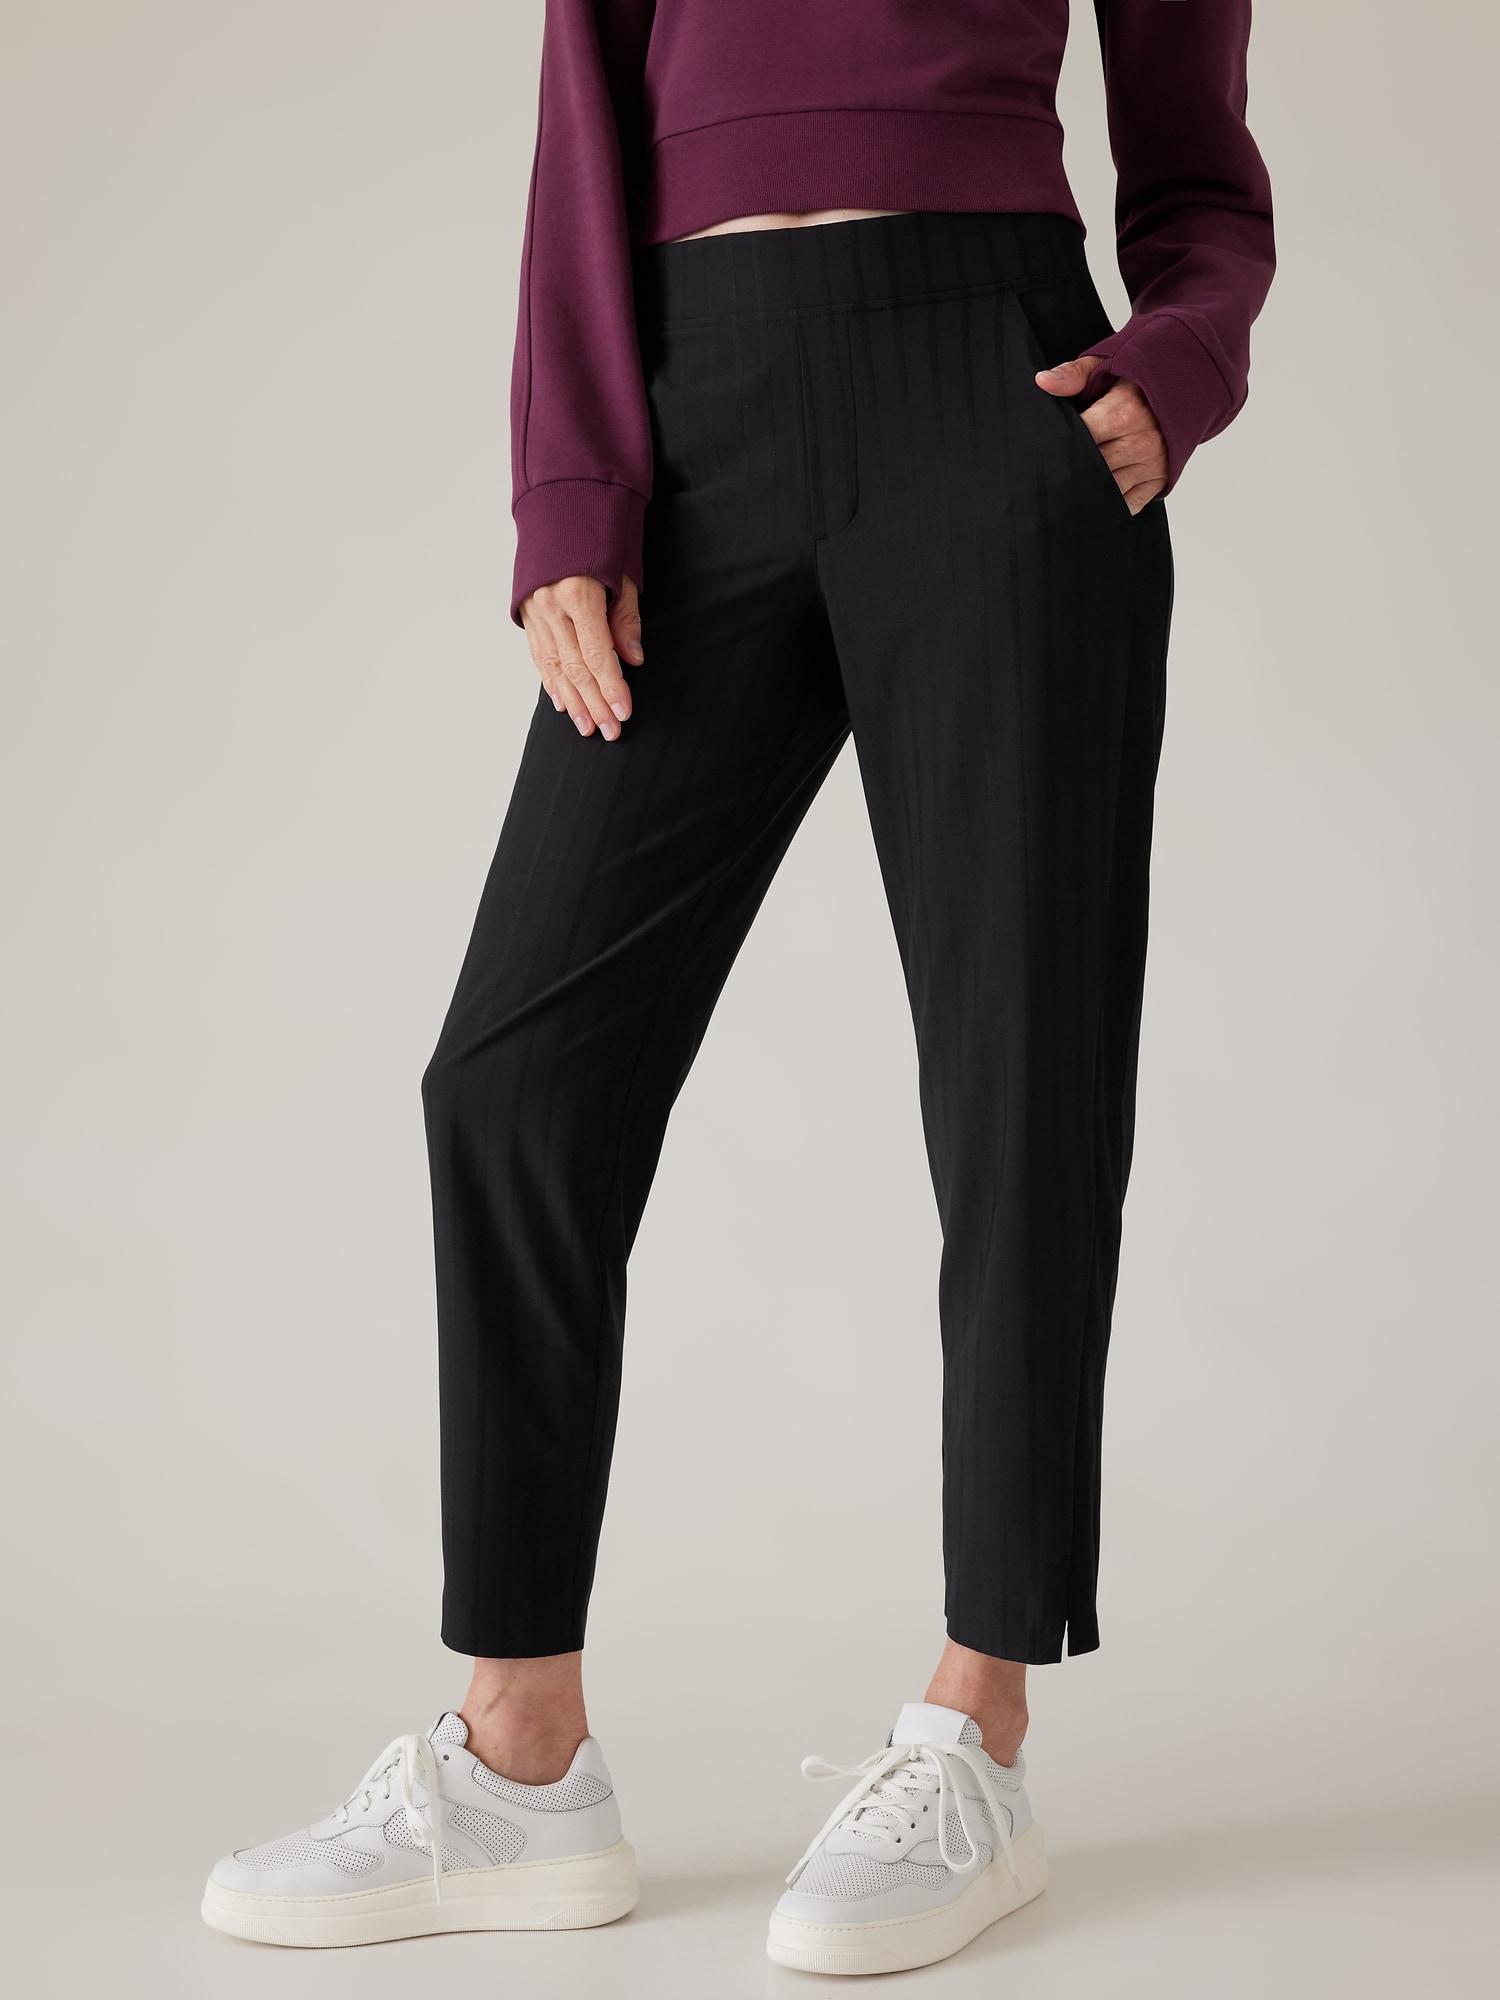 Athleta, Pants & Jumpsuits, Womens New With Tag Athleta Size 8 Brooklyn  Mid Rise Ankle Pant